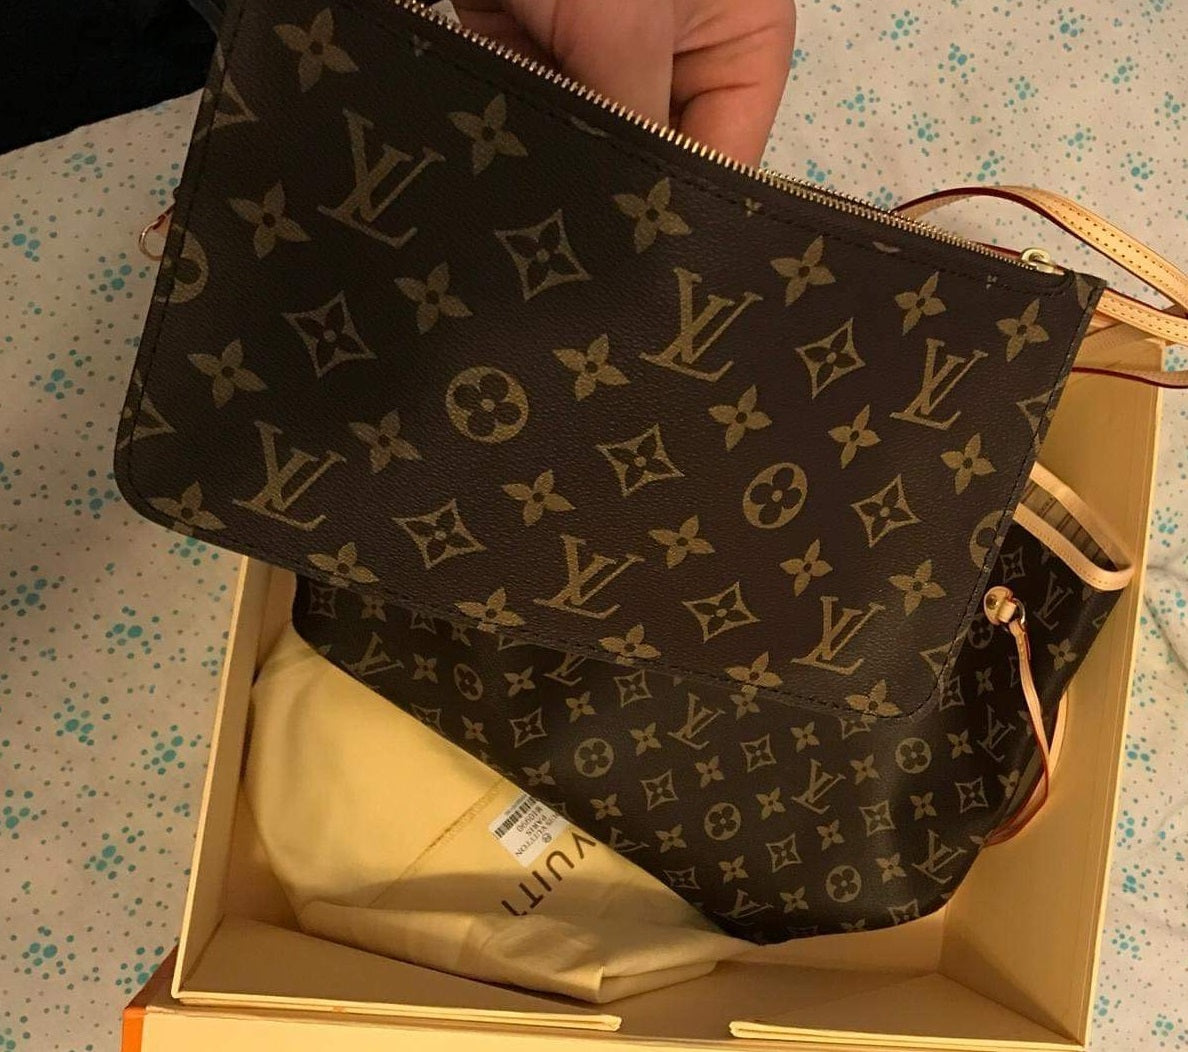 Fake Louis Vuitton Neverfull vs Real: Important Details You Should Definitely Pay Attention To (With Photo Examples) Neverfull Monogram Pouch